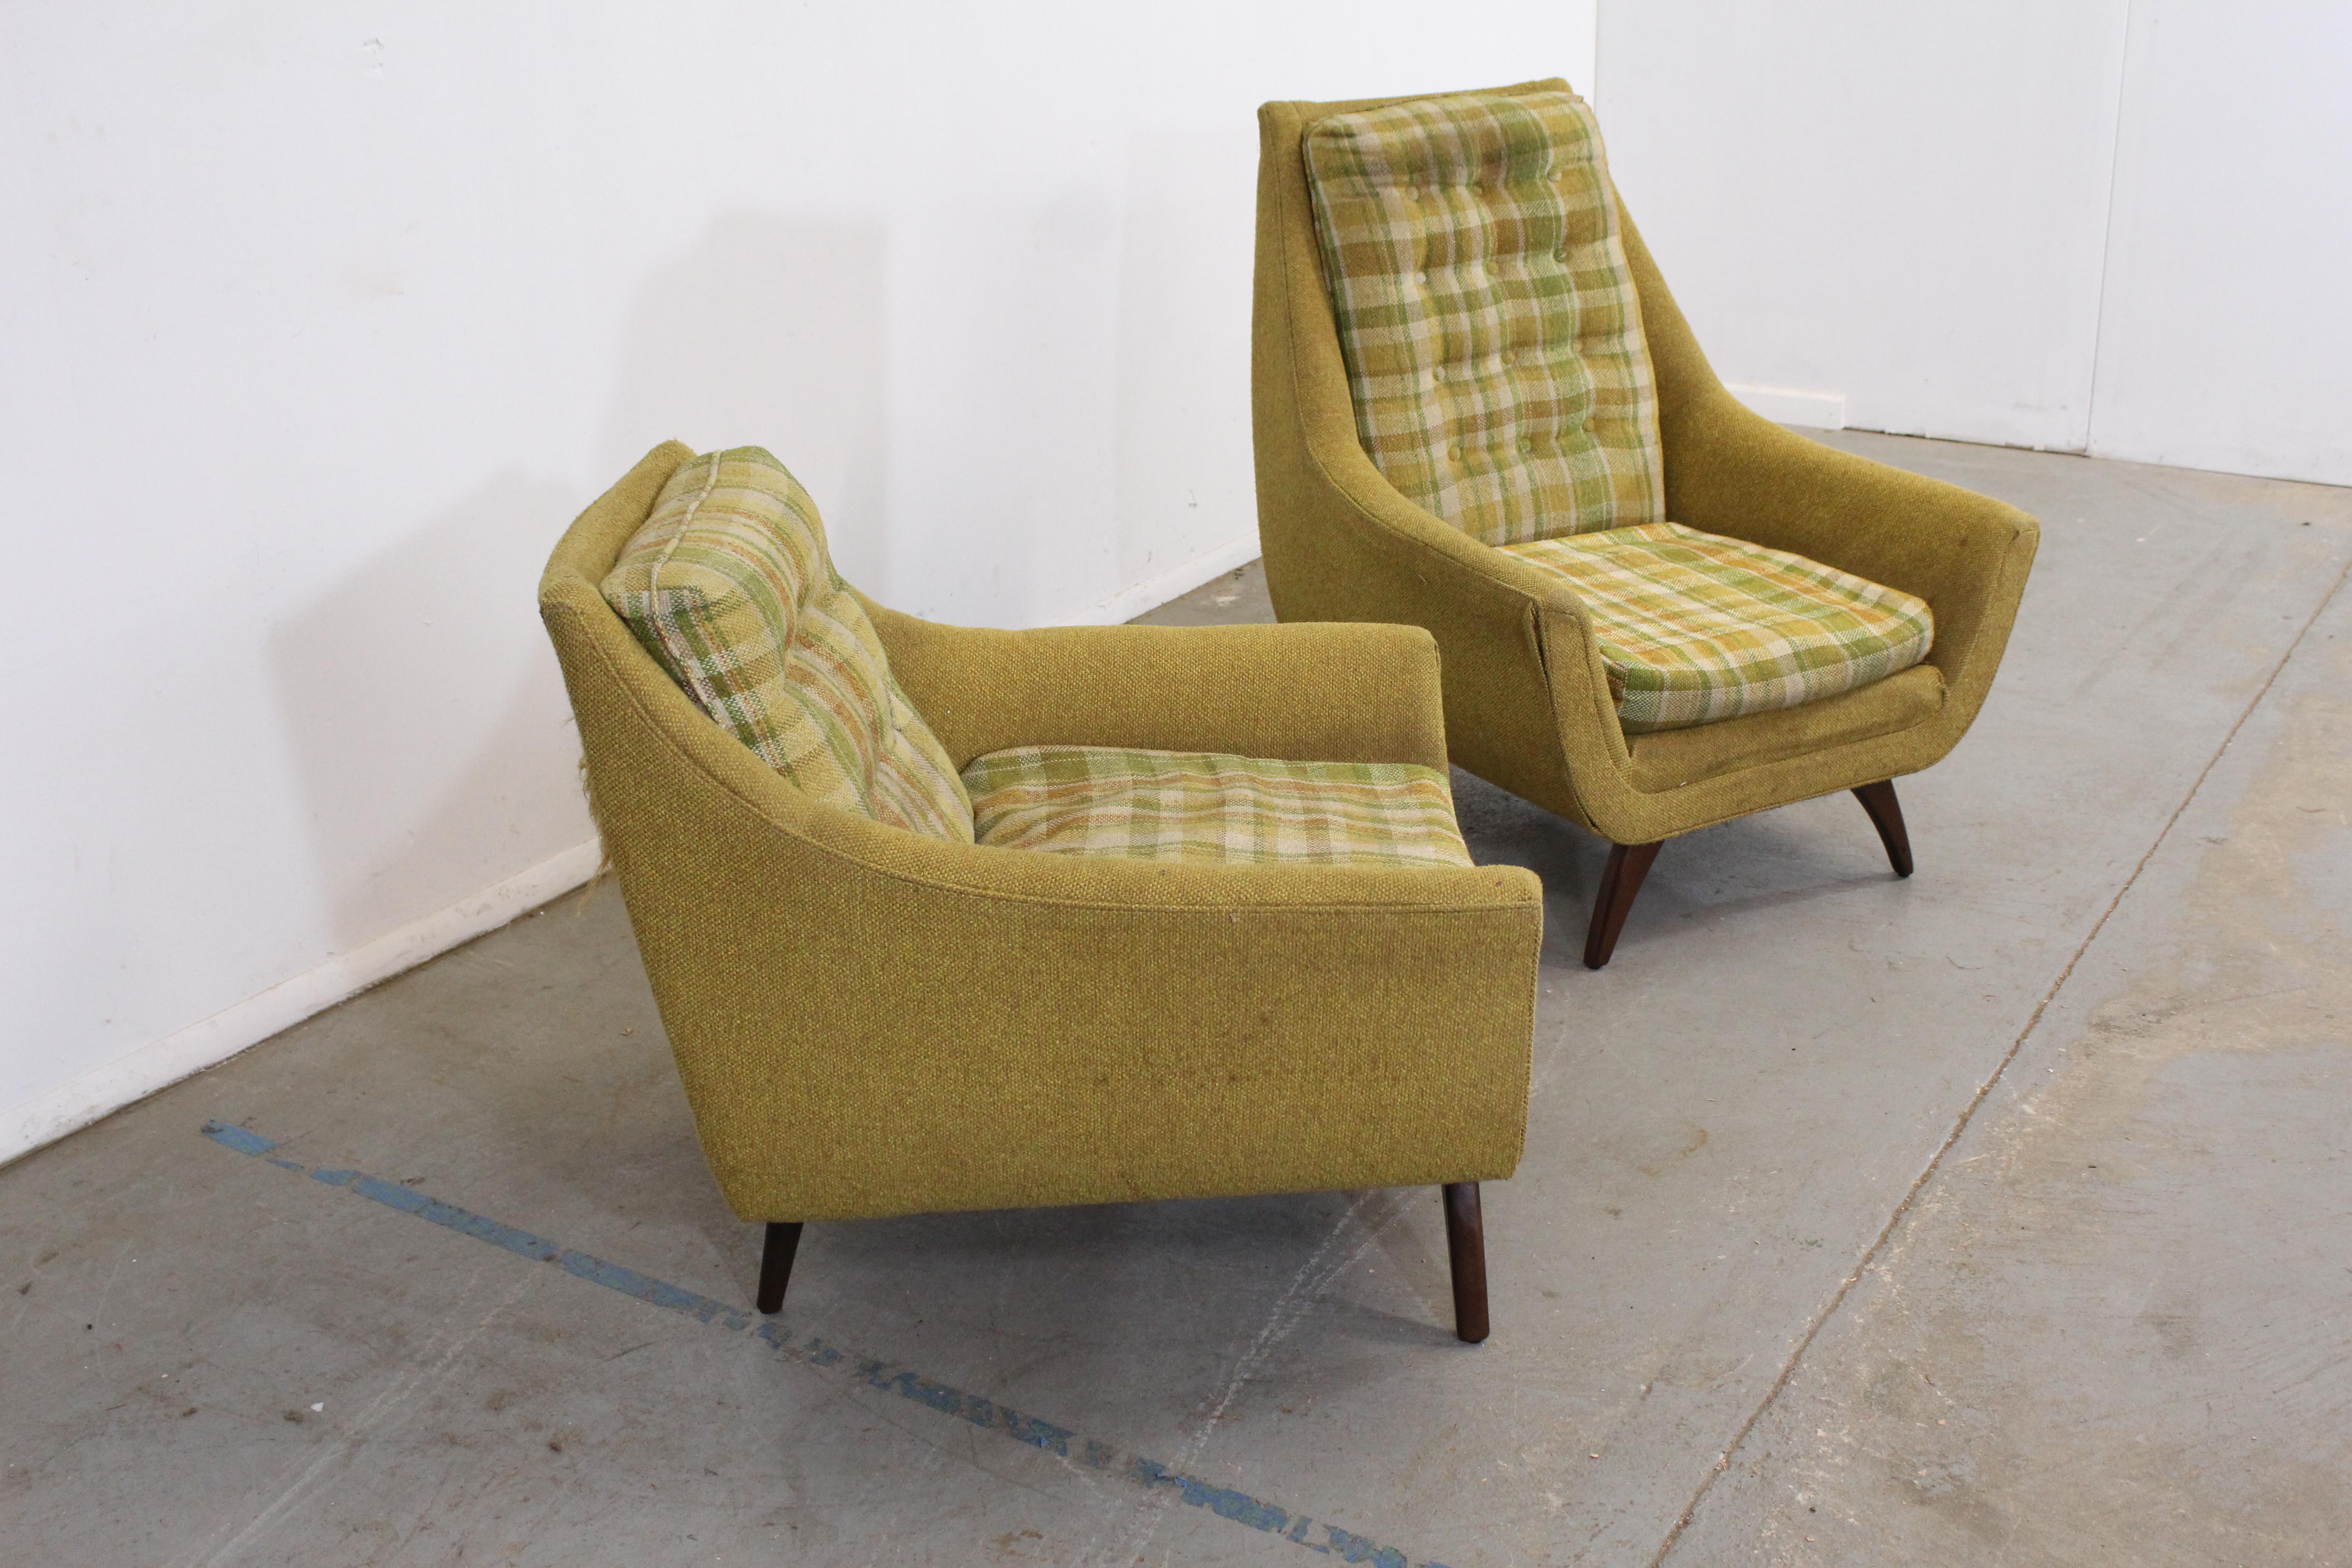 North American Mid-Century Modern Adrian Pearsall Style His & Her Lounge Chairs by Bassett Arm 